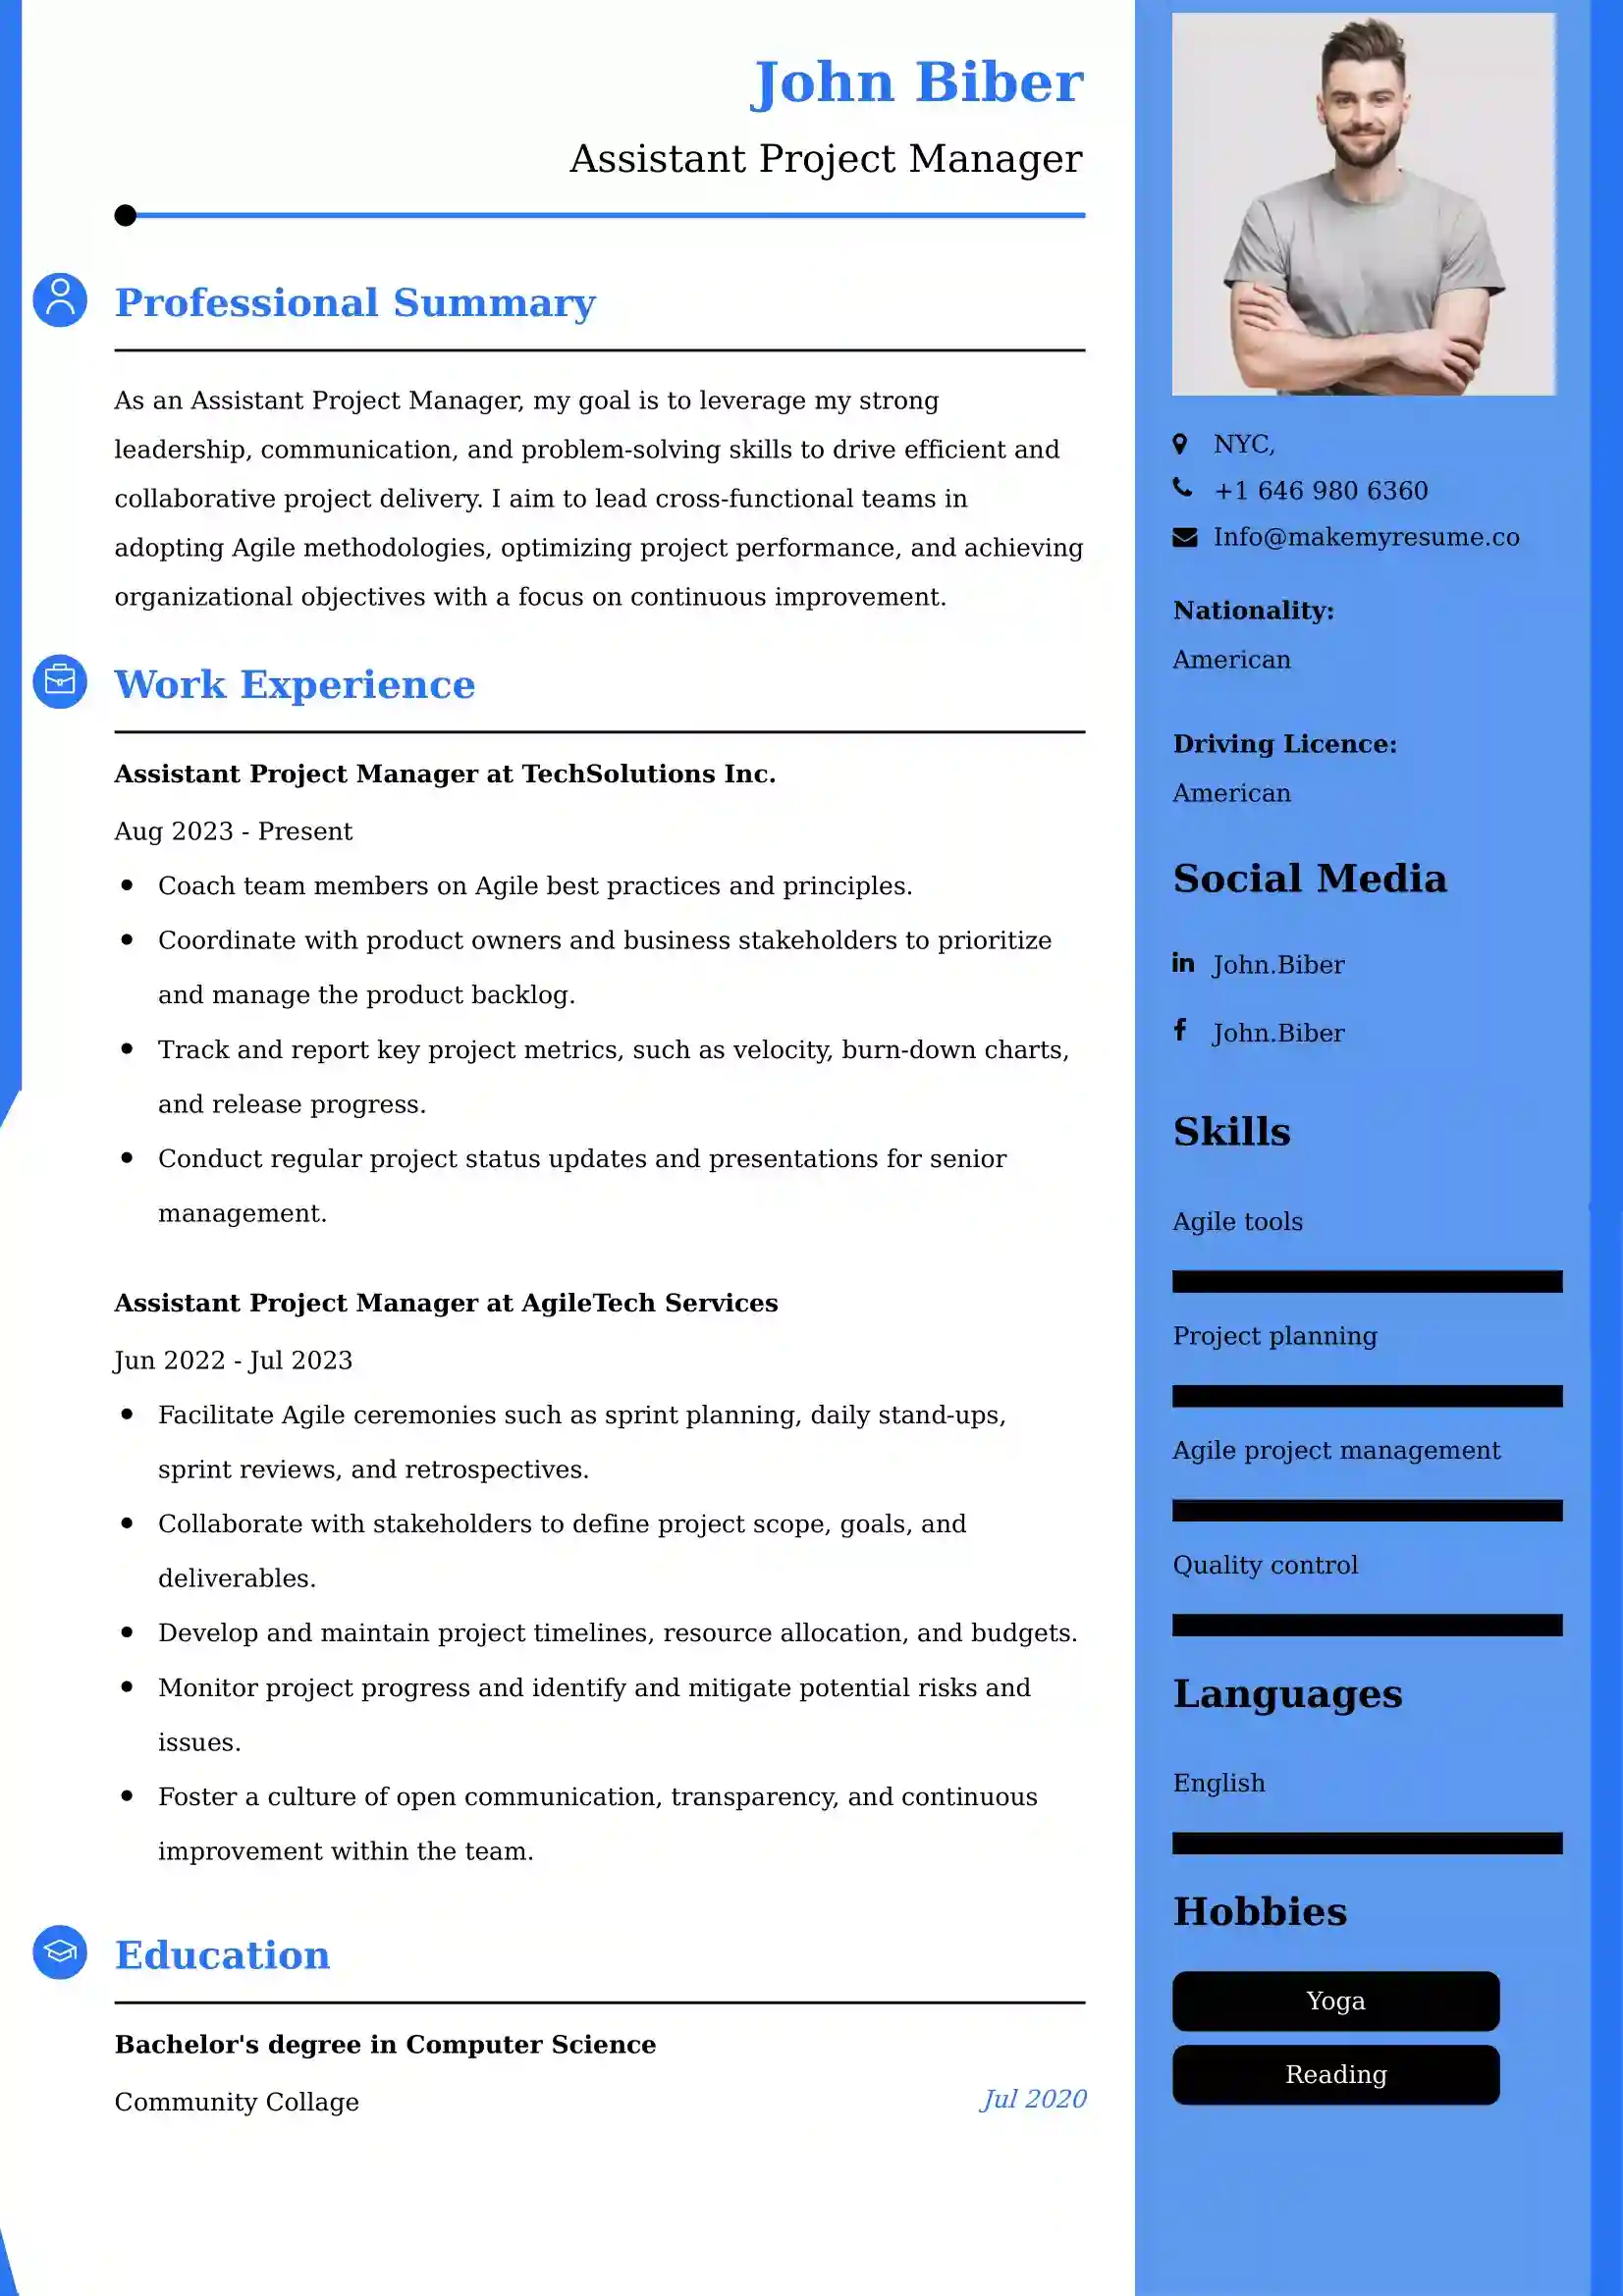 Assistant Project Manager CV Examples - US Format